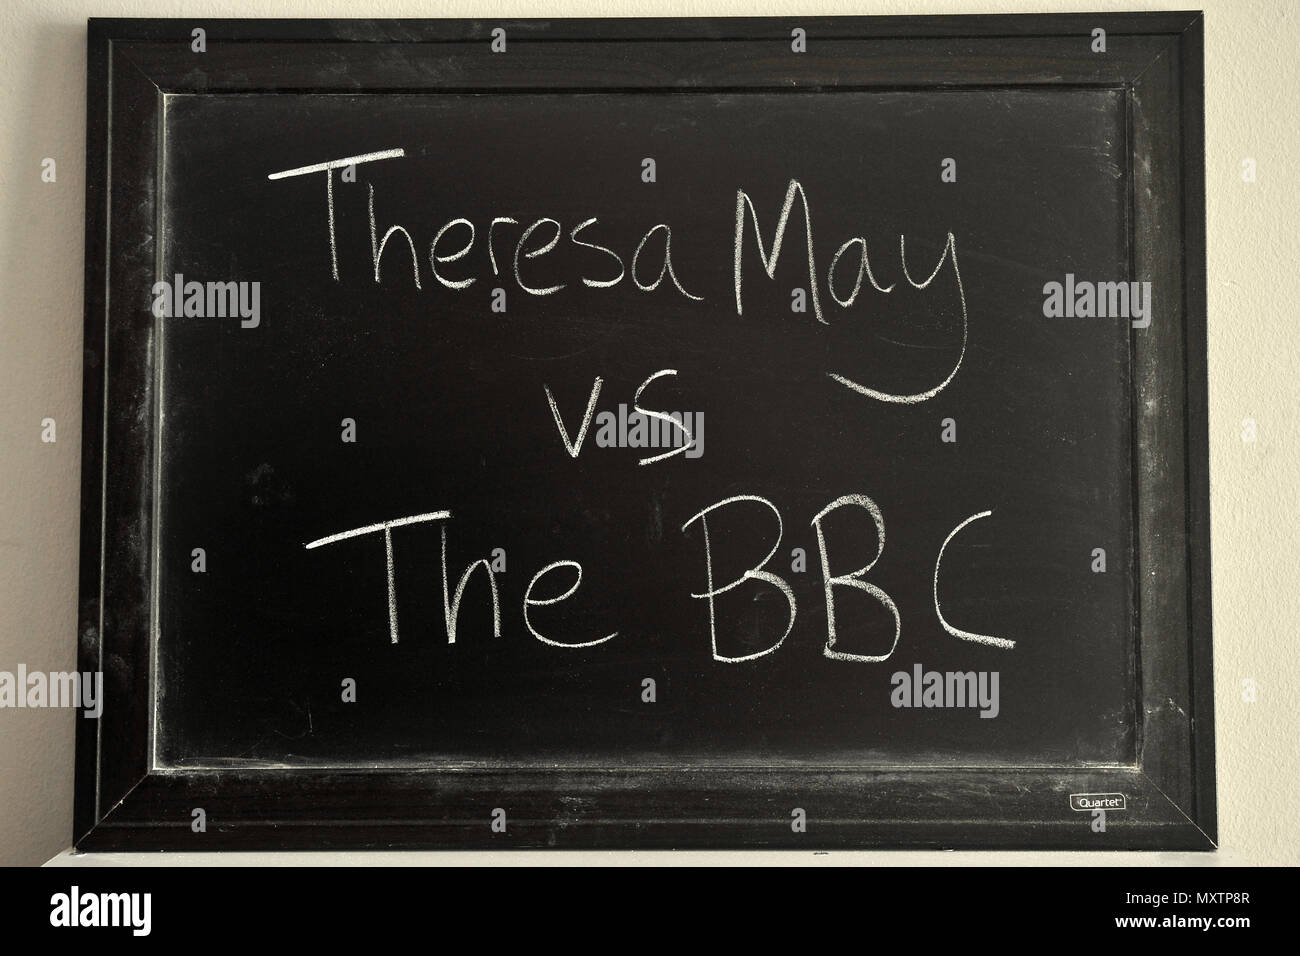 Theresa May vs The BBC written in white chalk on a blackboard. Stock Photo